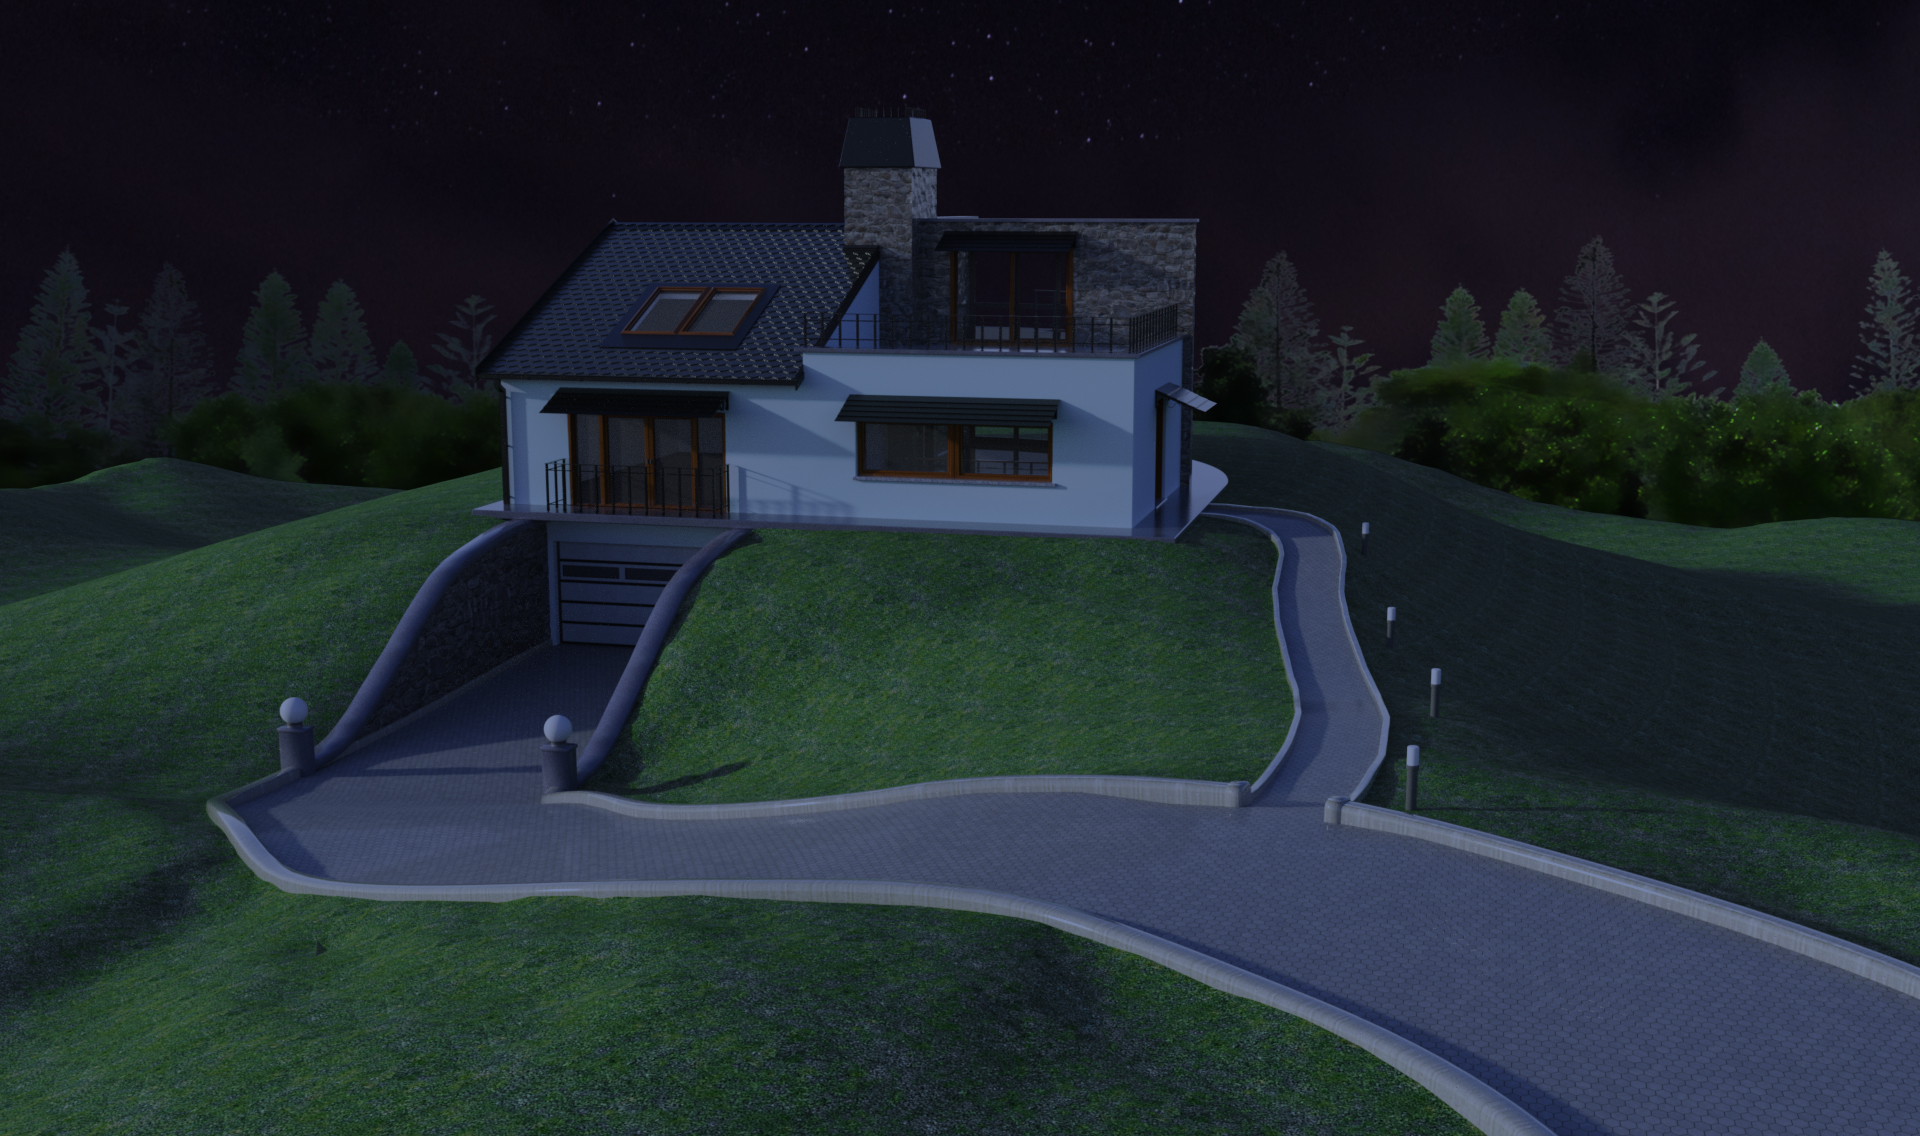 EXT. HOUSE ON THE HILL 4 – NIGHT